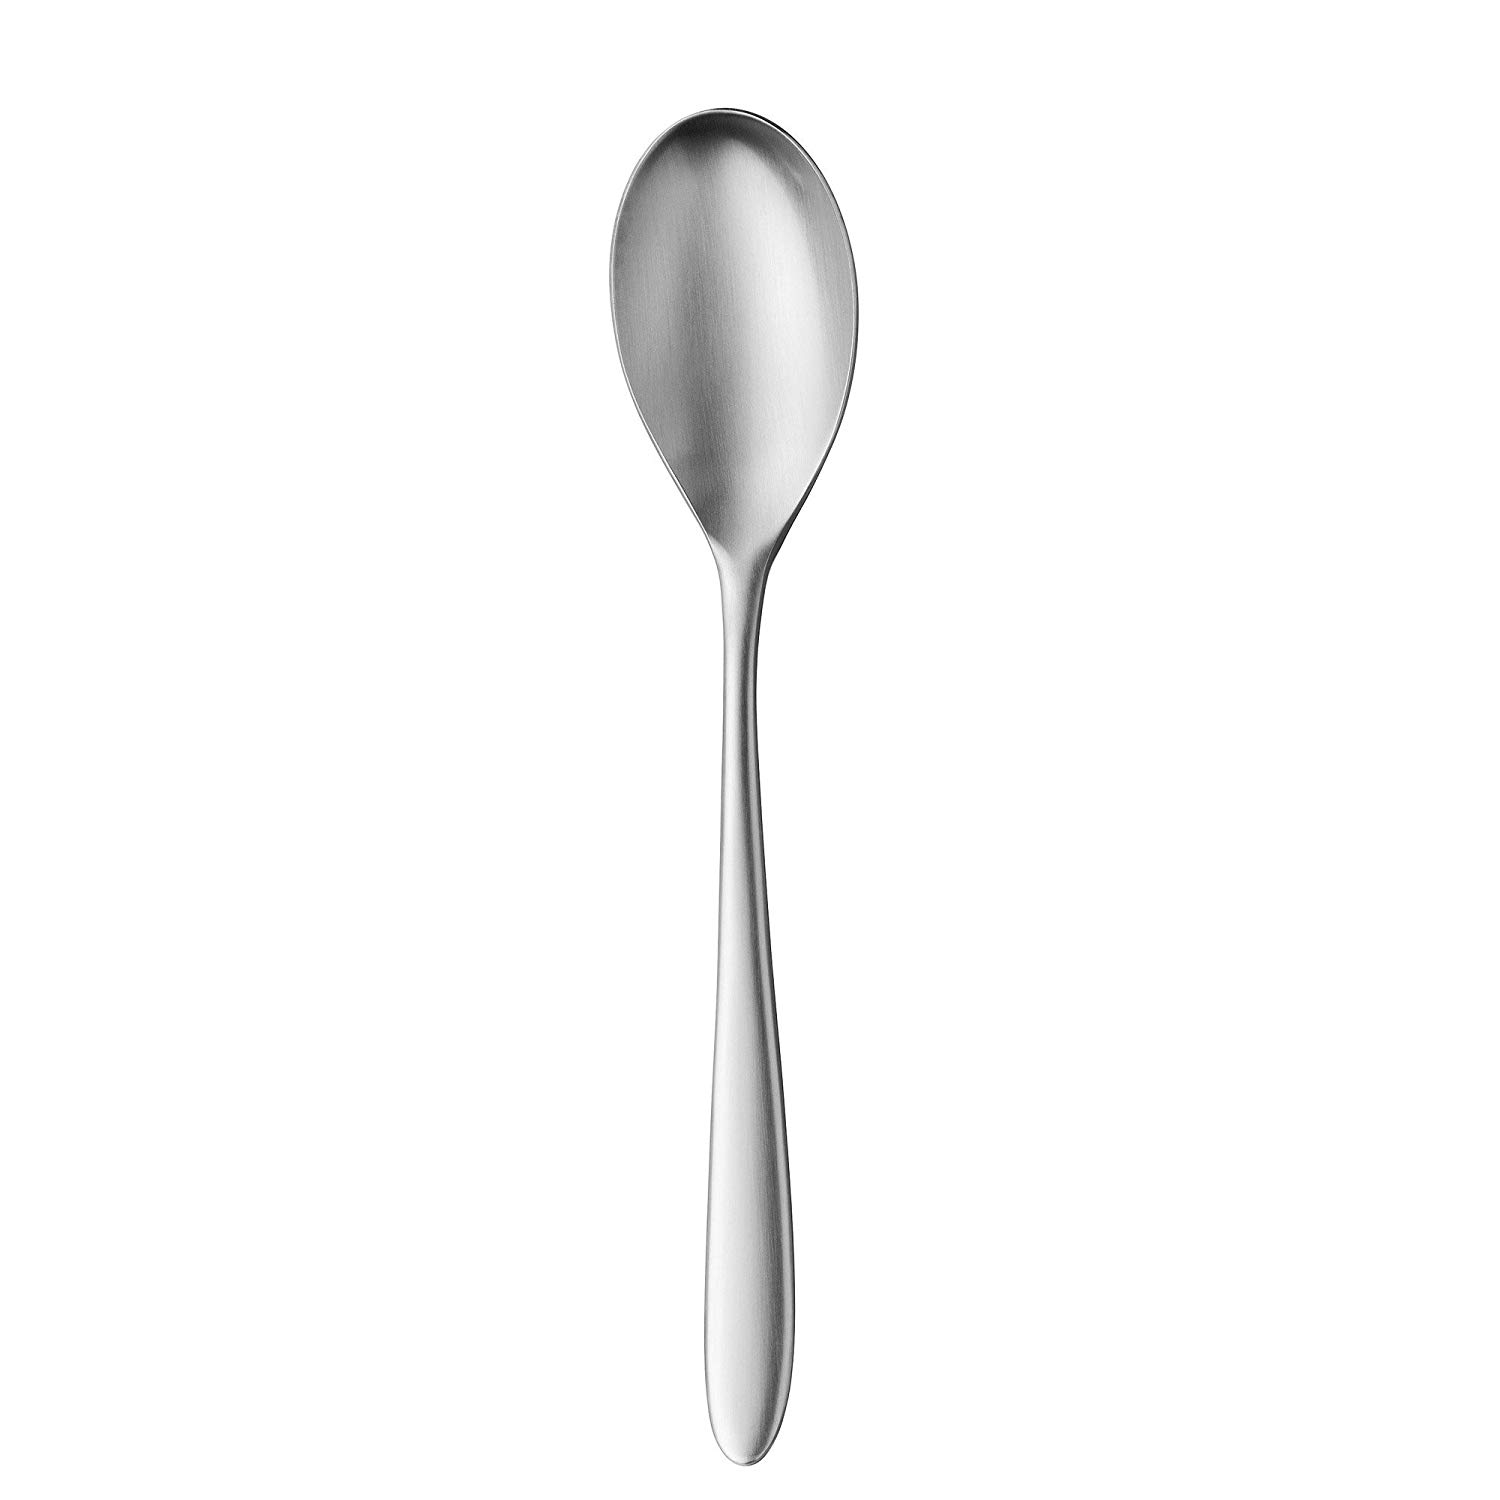 Restaurantware Imperial 18/10 Stainless Steel Table Spoon - 7 3/4 inch - 2 Count Box, Silver